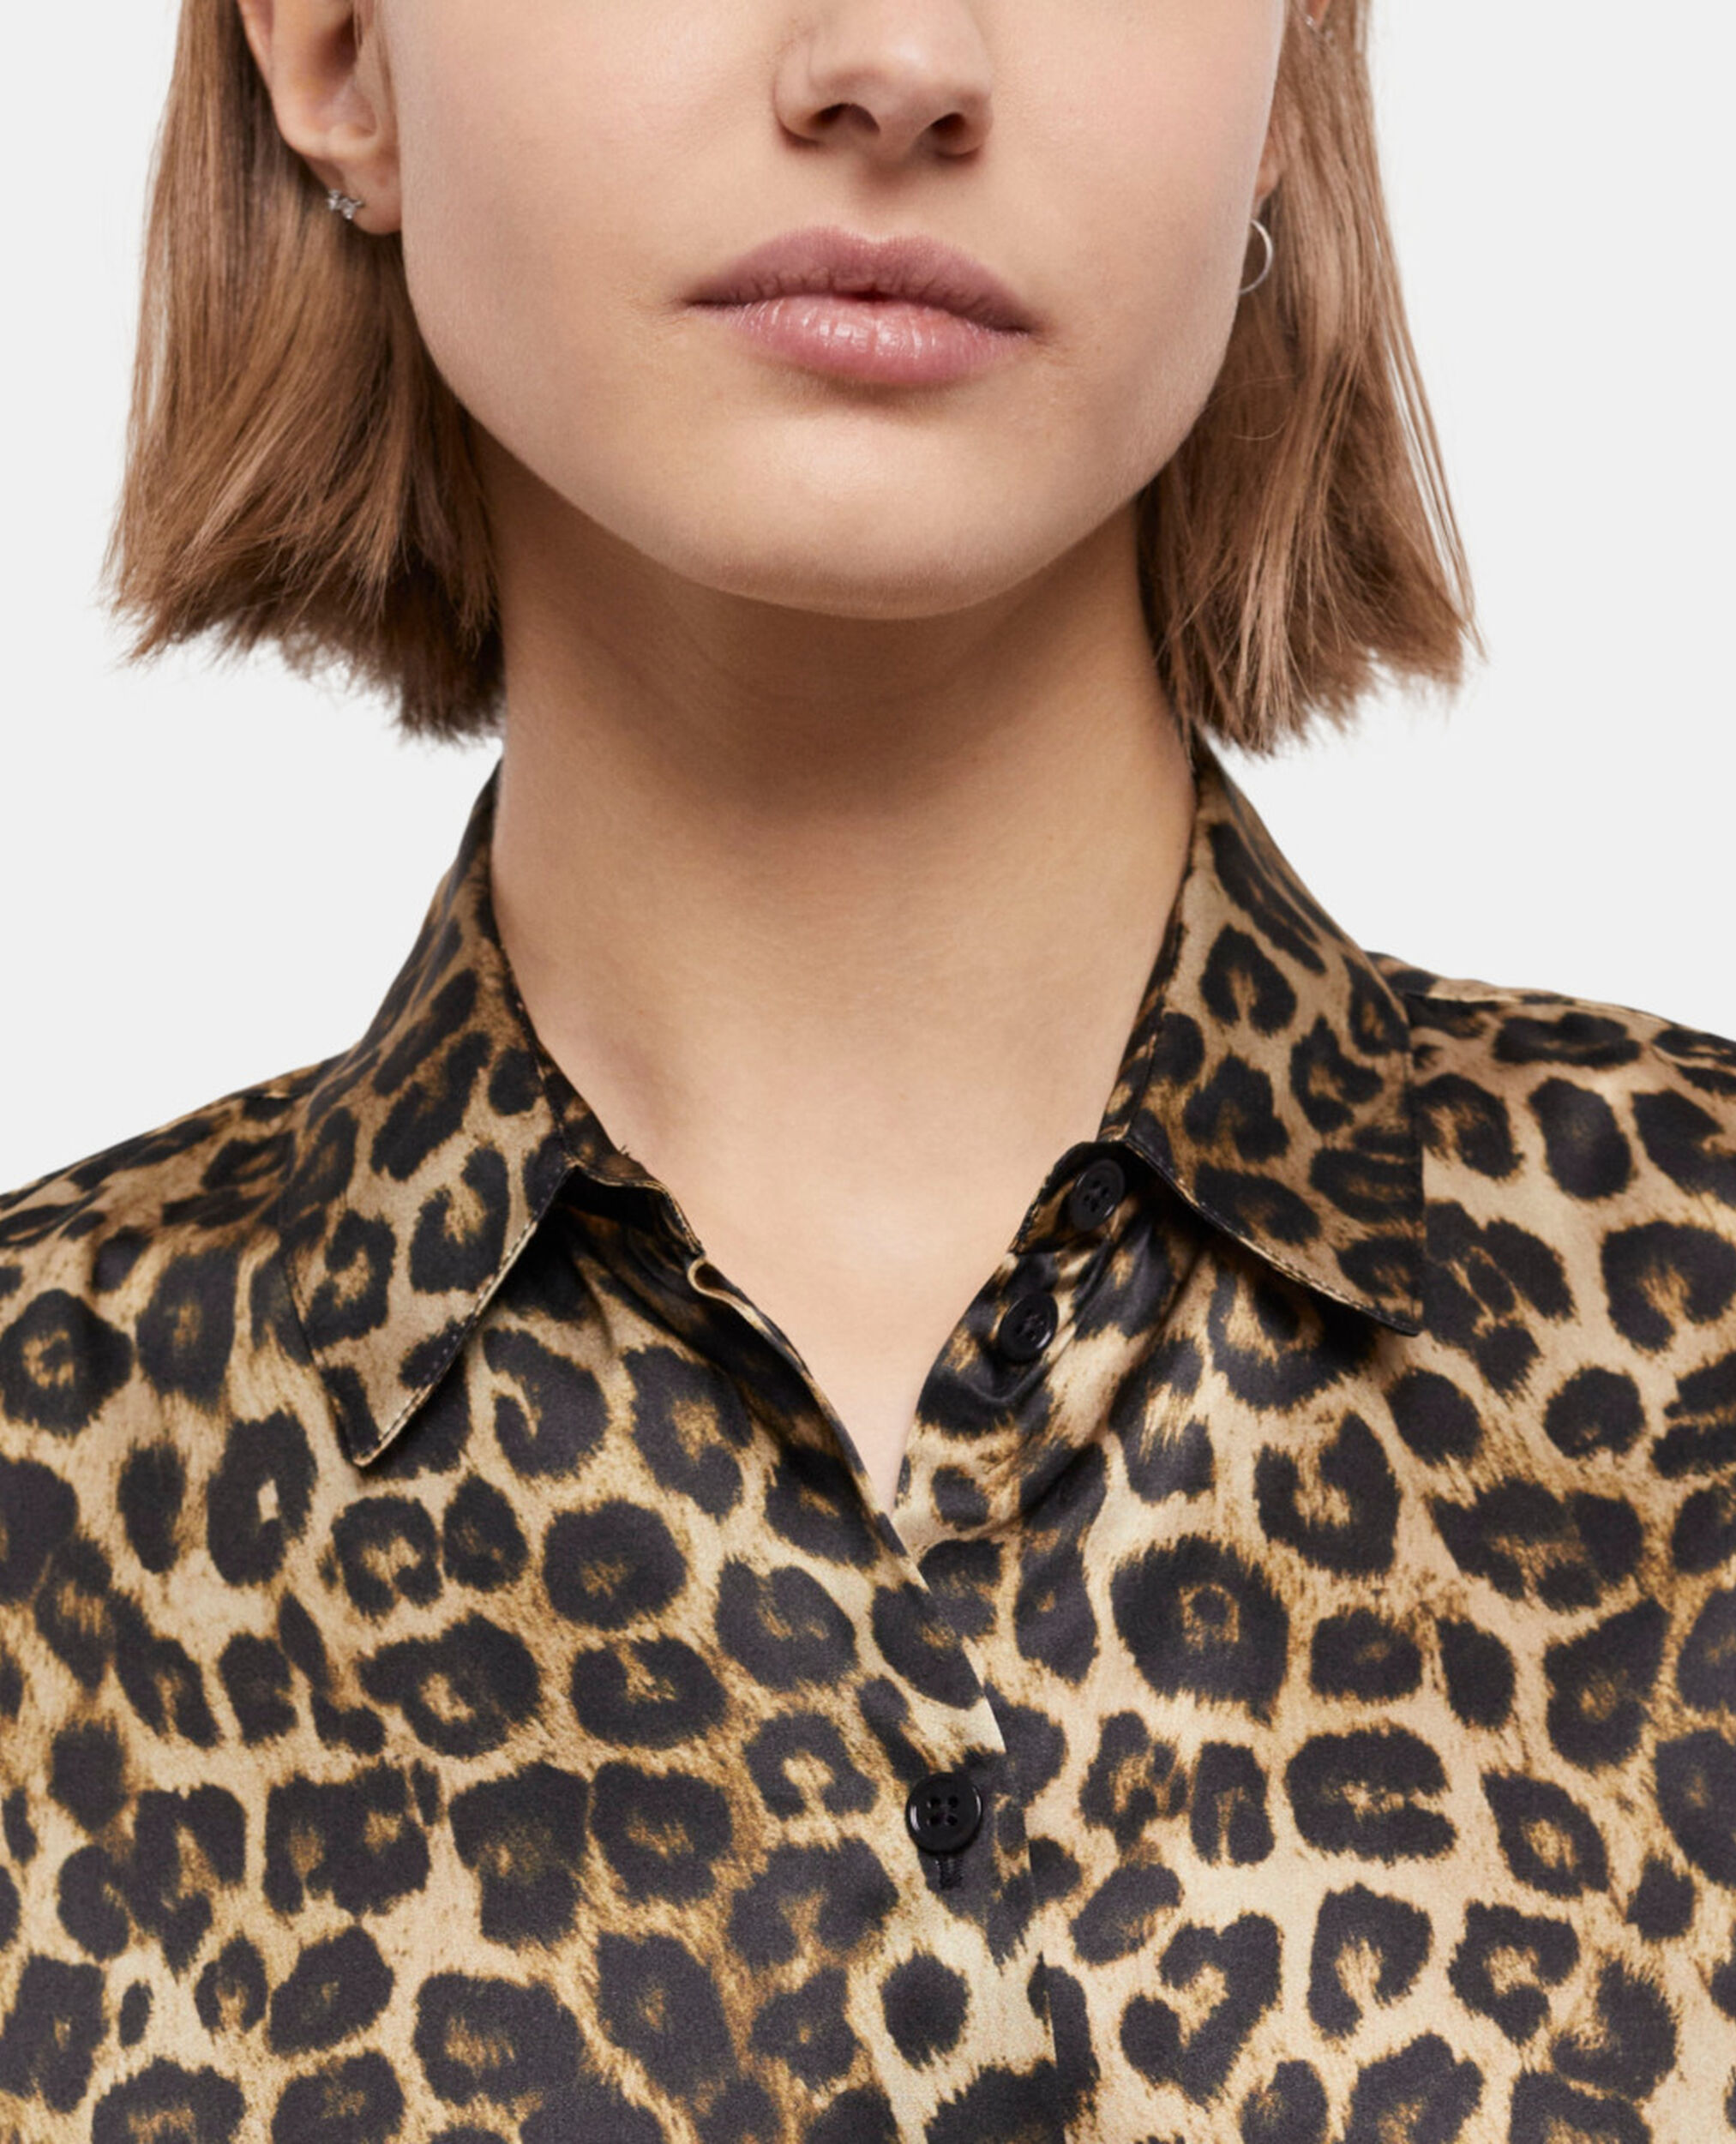 Get spotted in style: How to rock a cheetah print shirt with jeans for ...